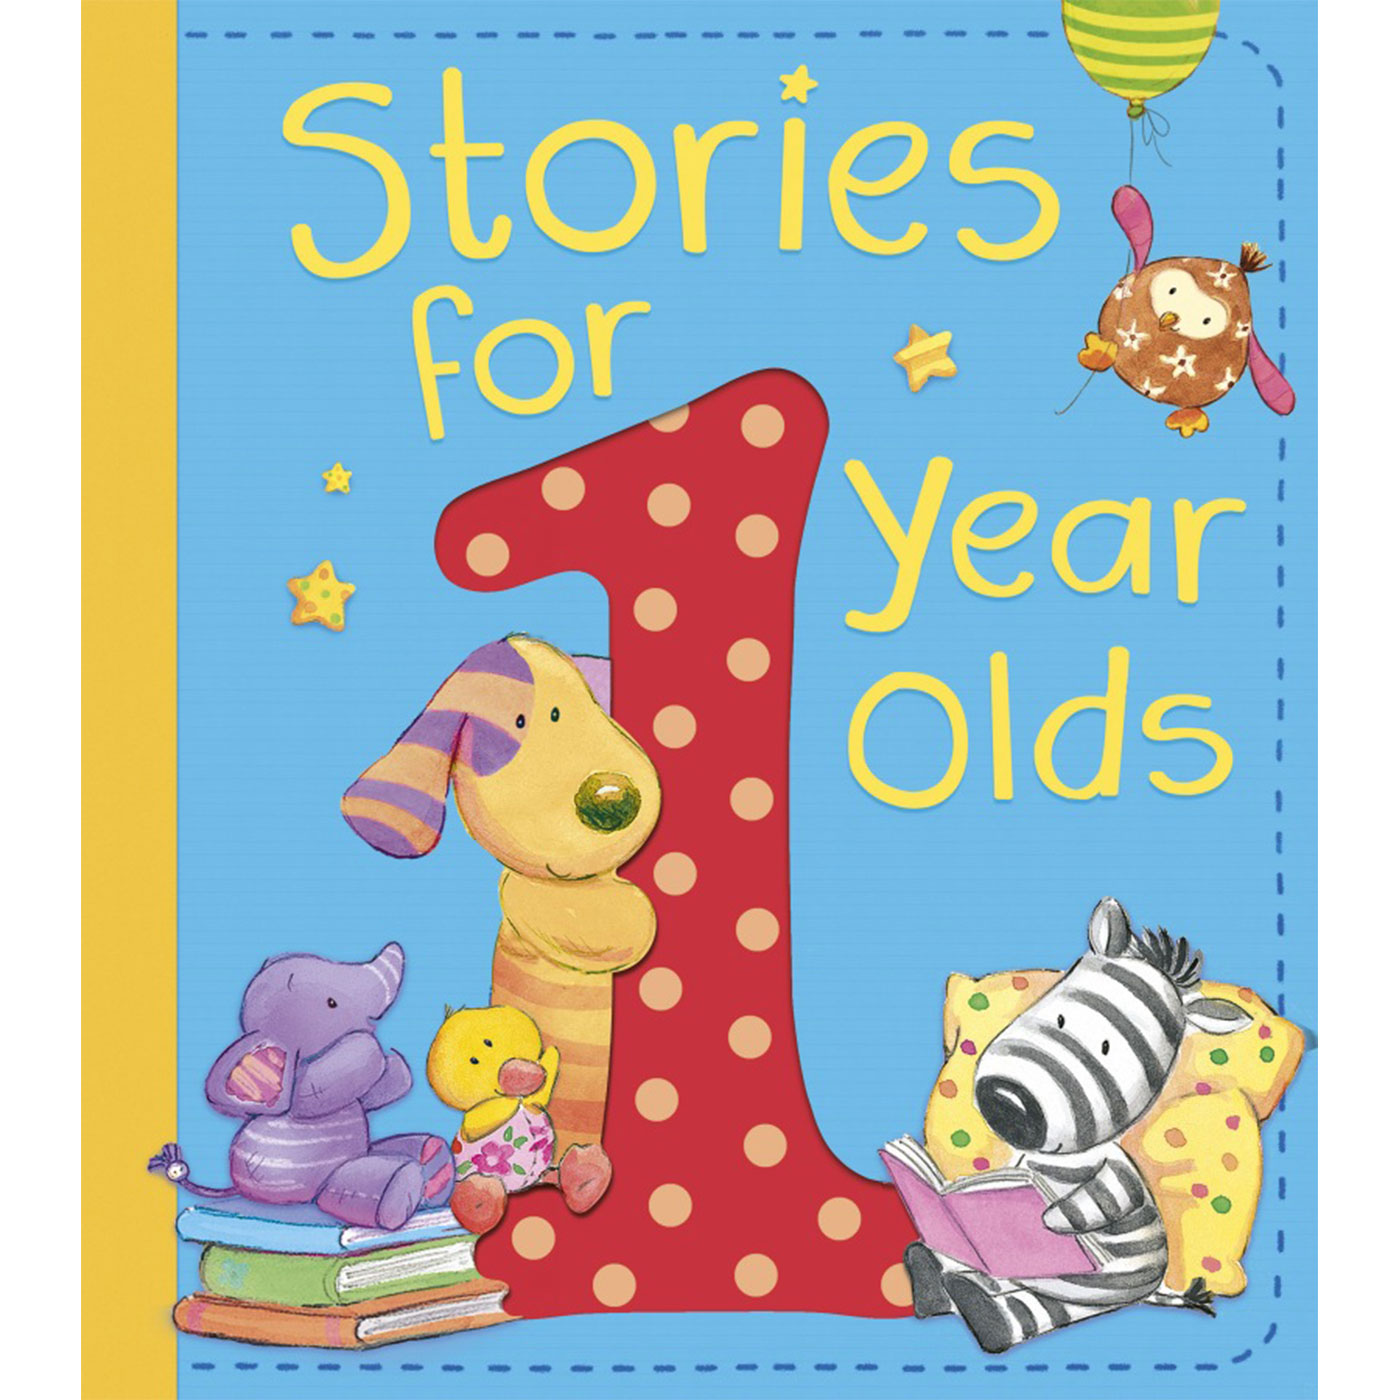  Stories For 1 Year Olds